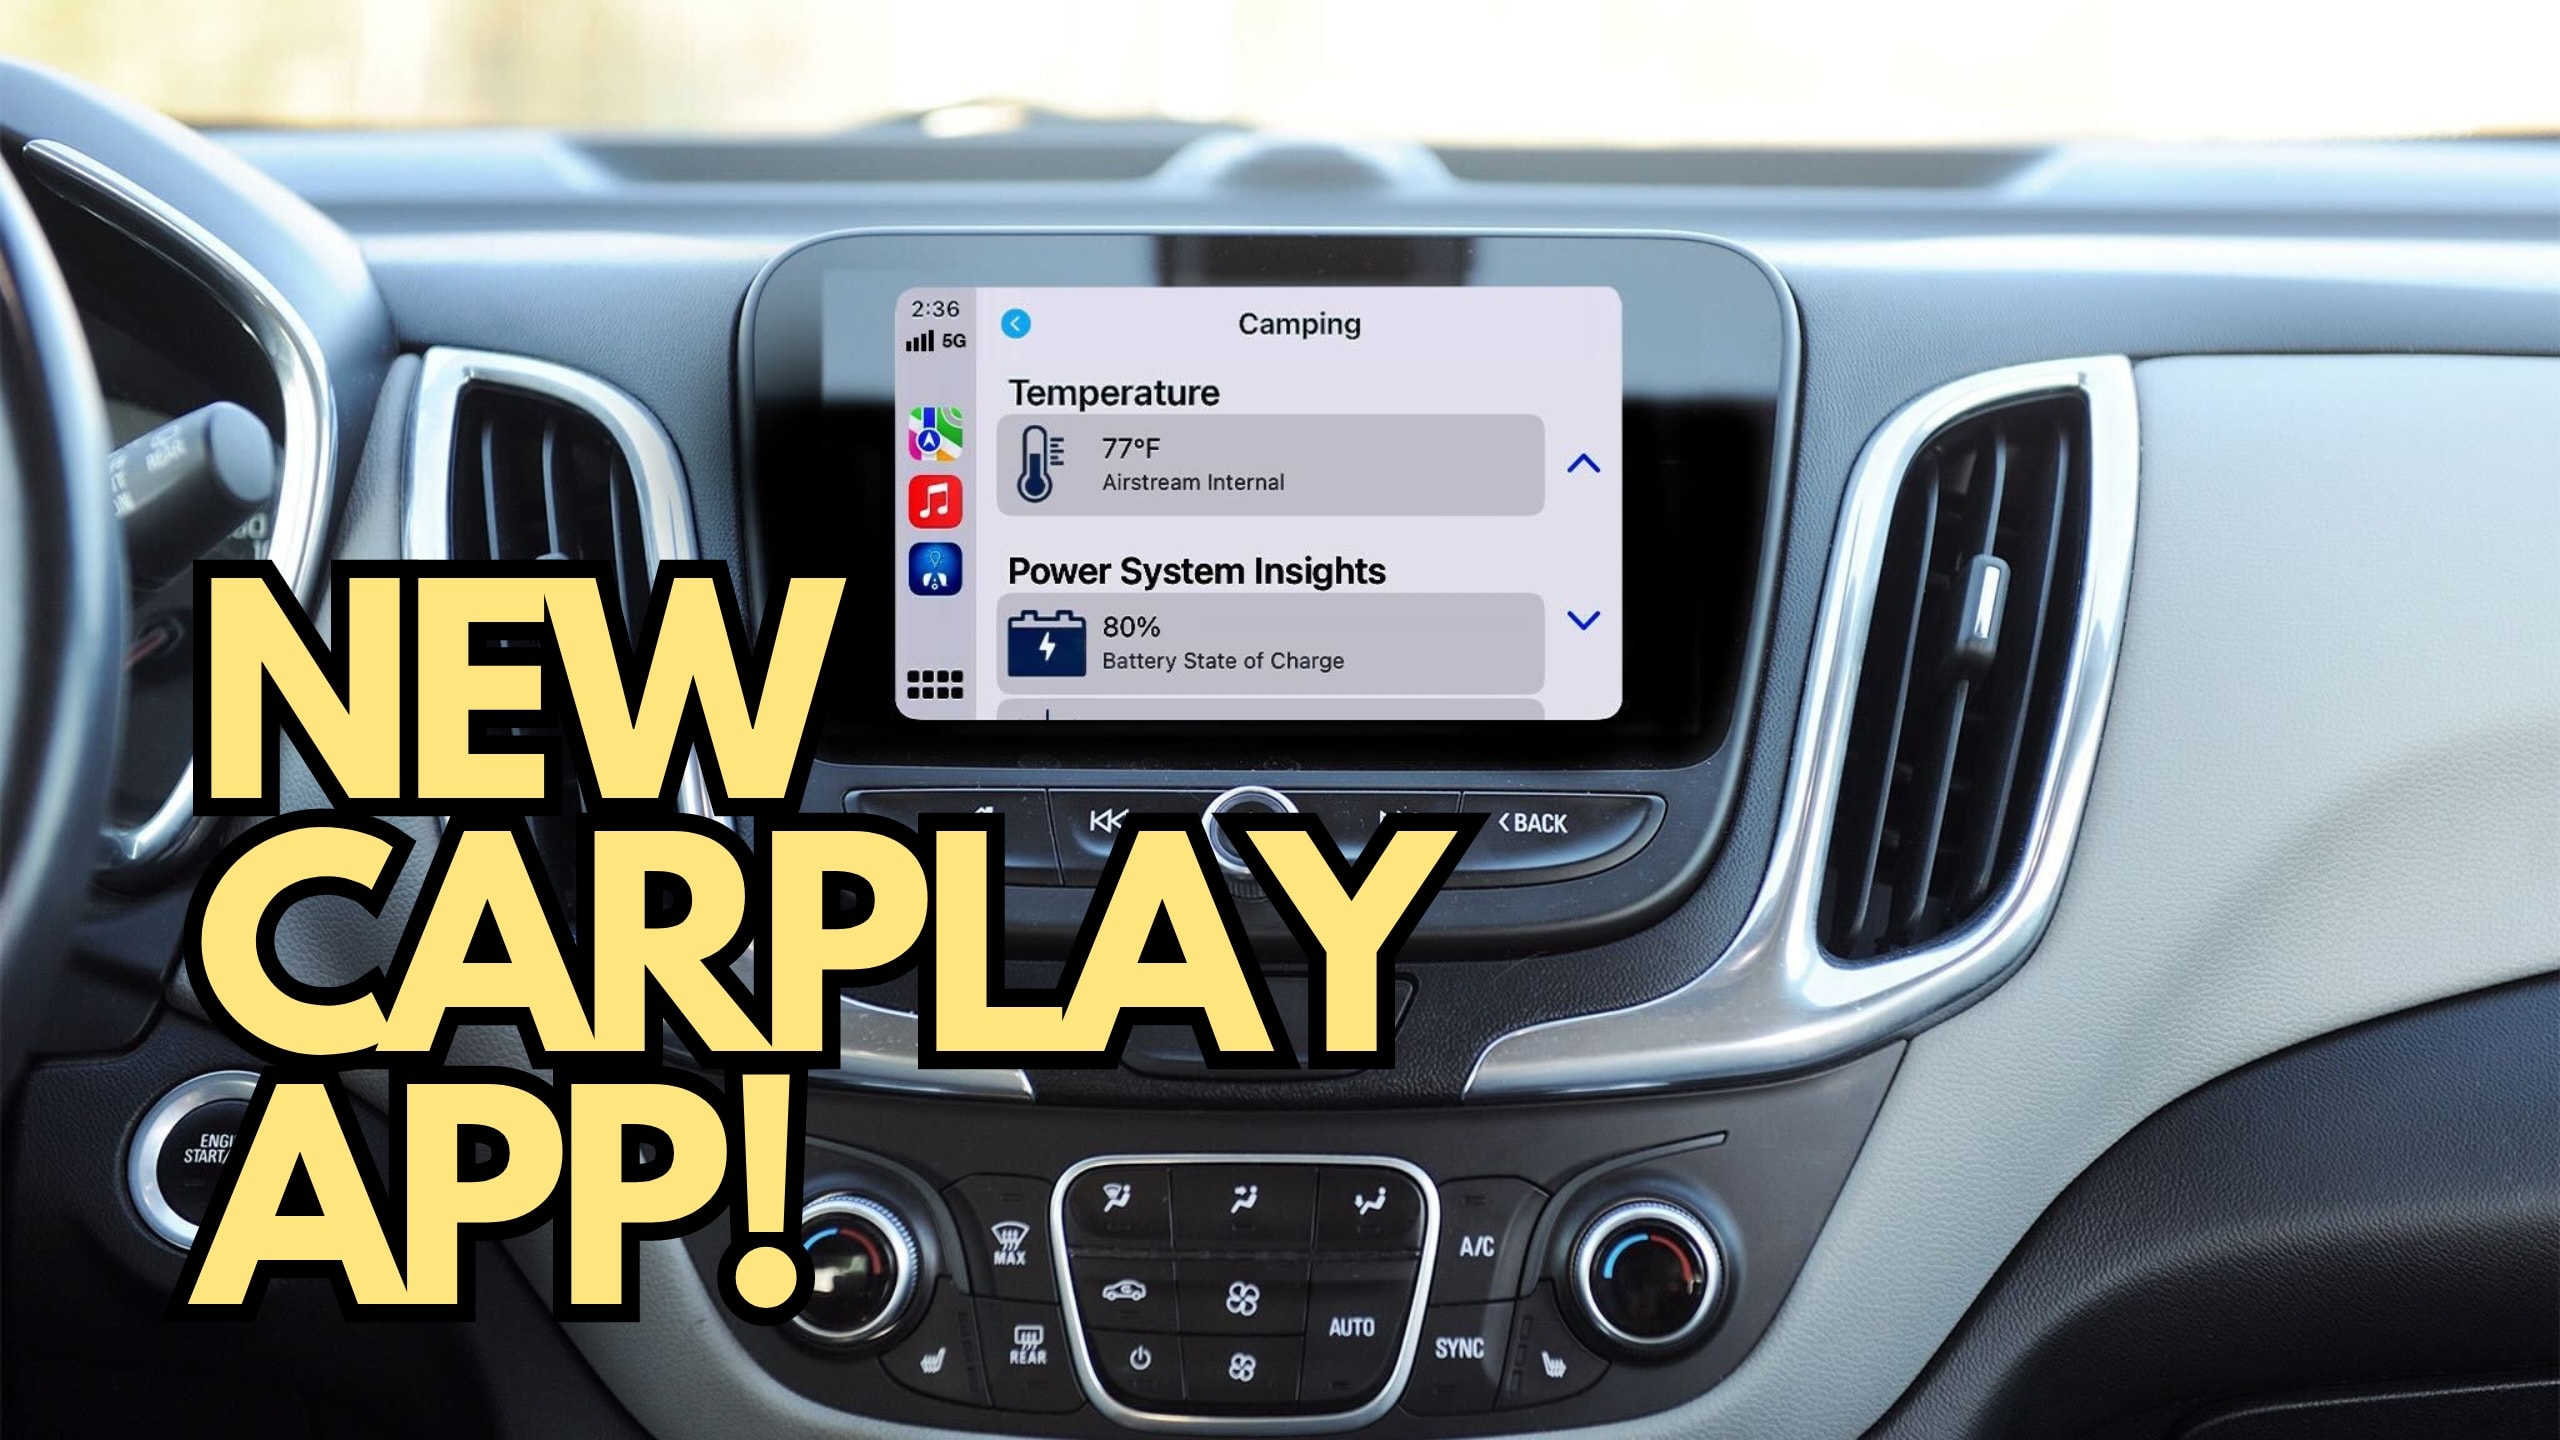 https://s1.cdn.autoevolution.com/images/news/new-app-launches-on-carplay-to-pioneer-new-features-beat-this-android-auto-222082_1.jpg